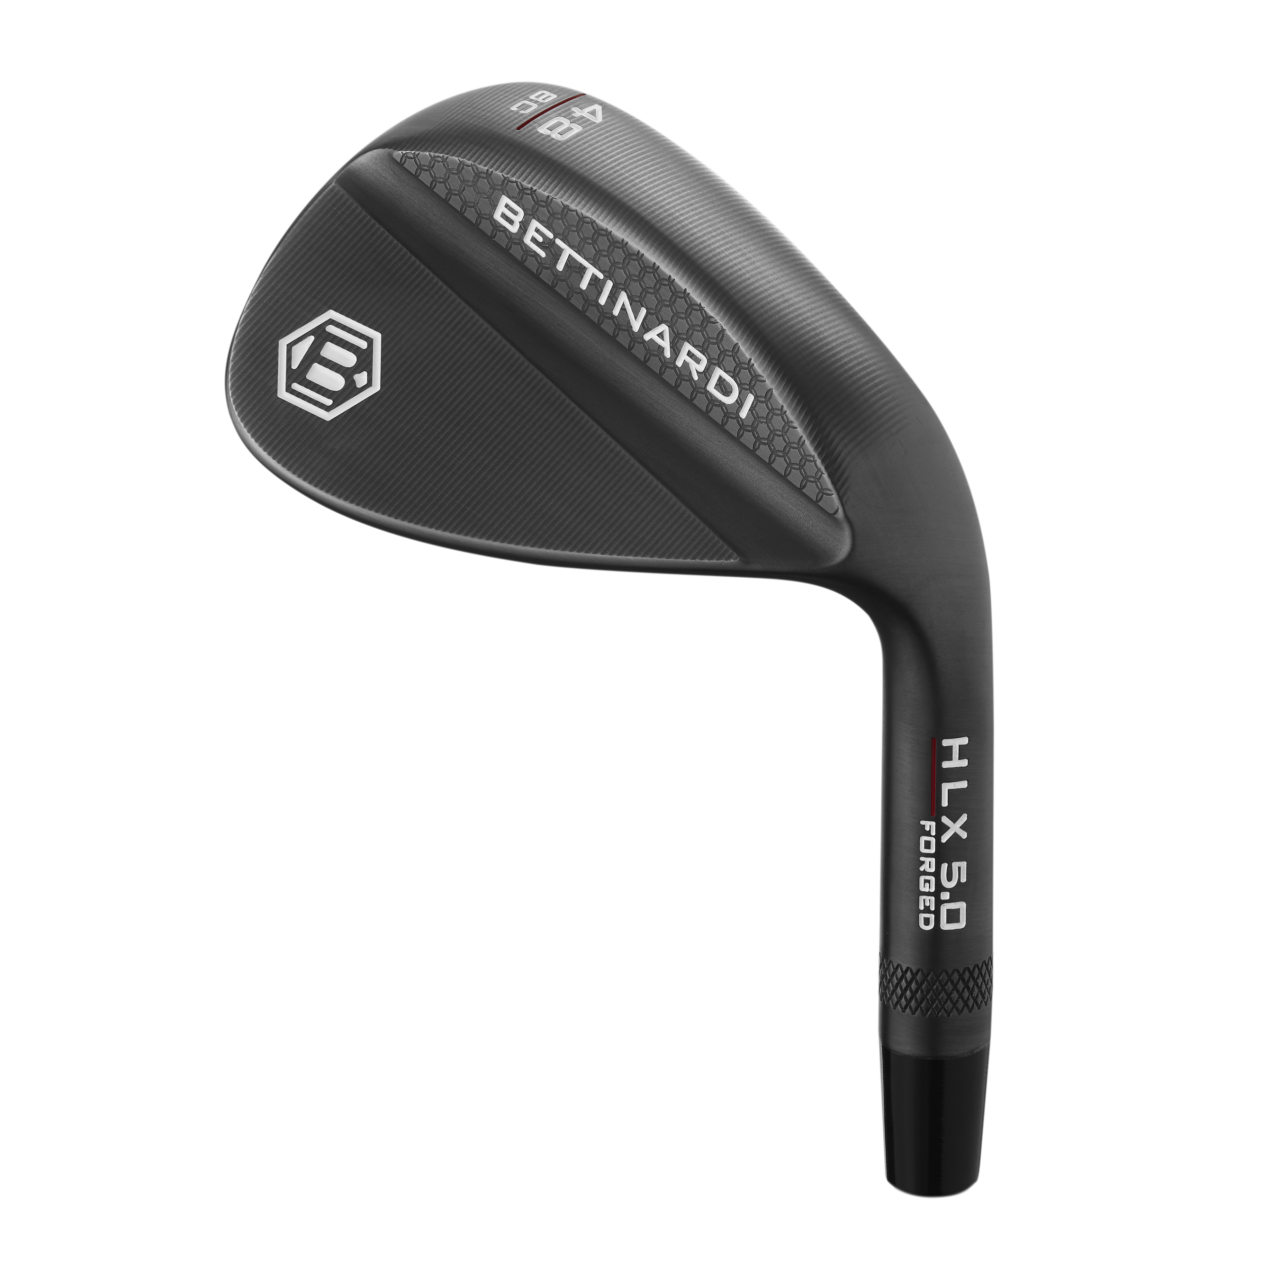 Bettinardi HLX 5.0 wedges: What you need to know | Golf Equipment